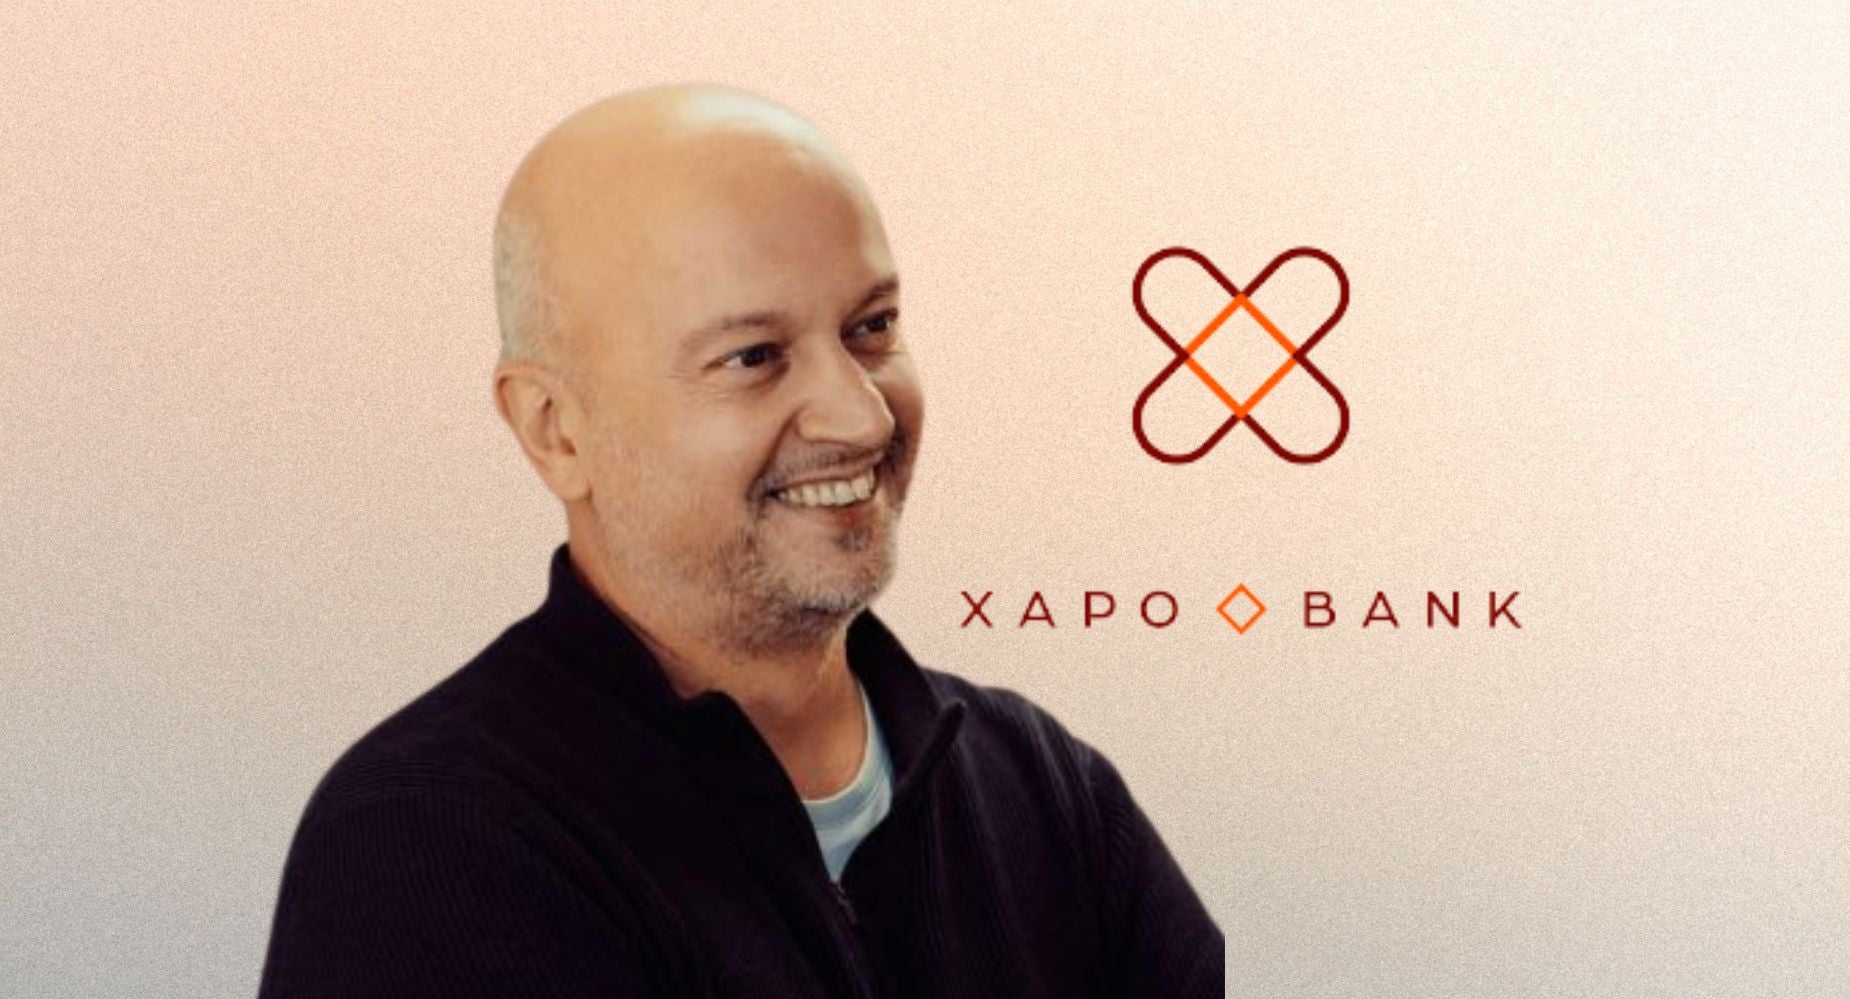 What makes Xapo Bank different from other digital banks?